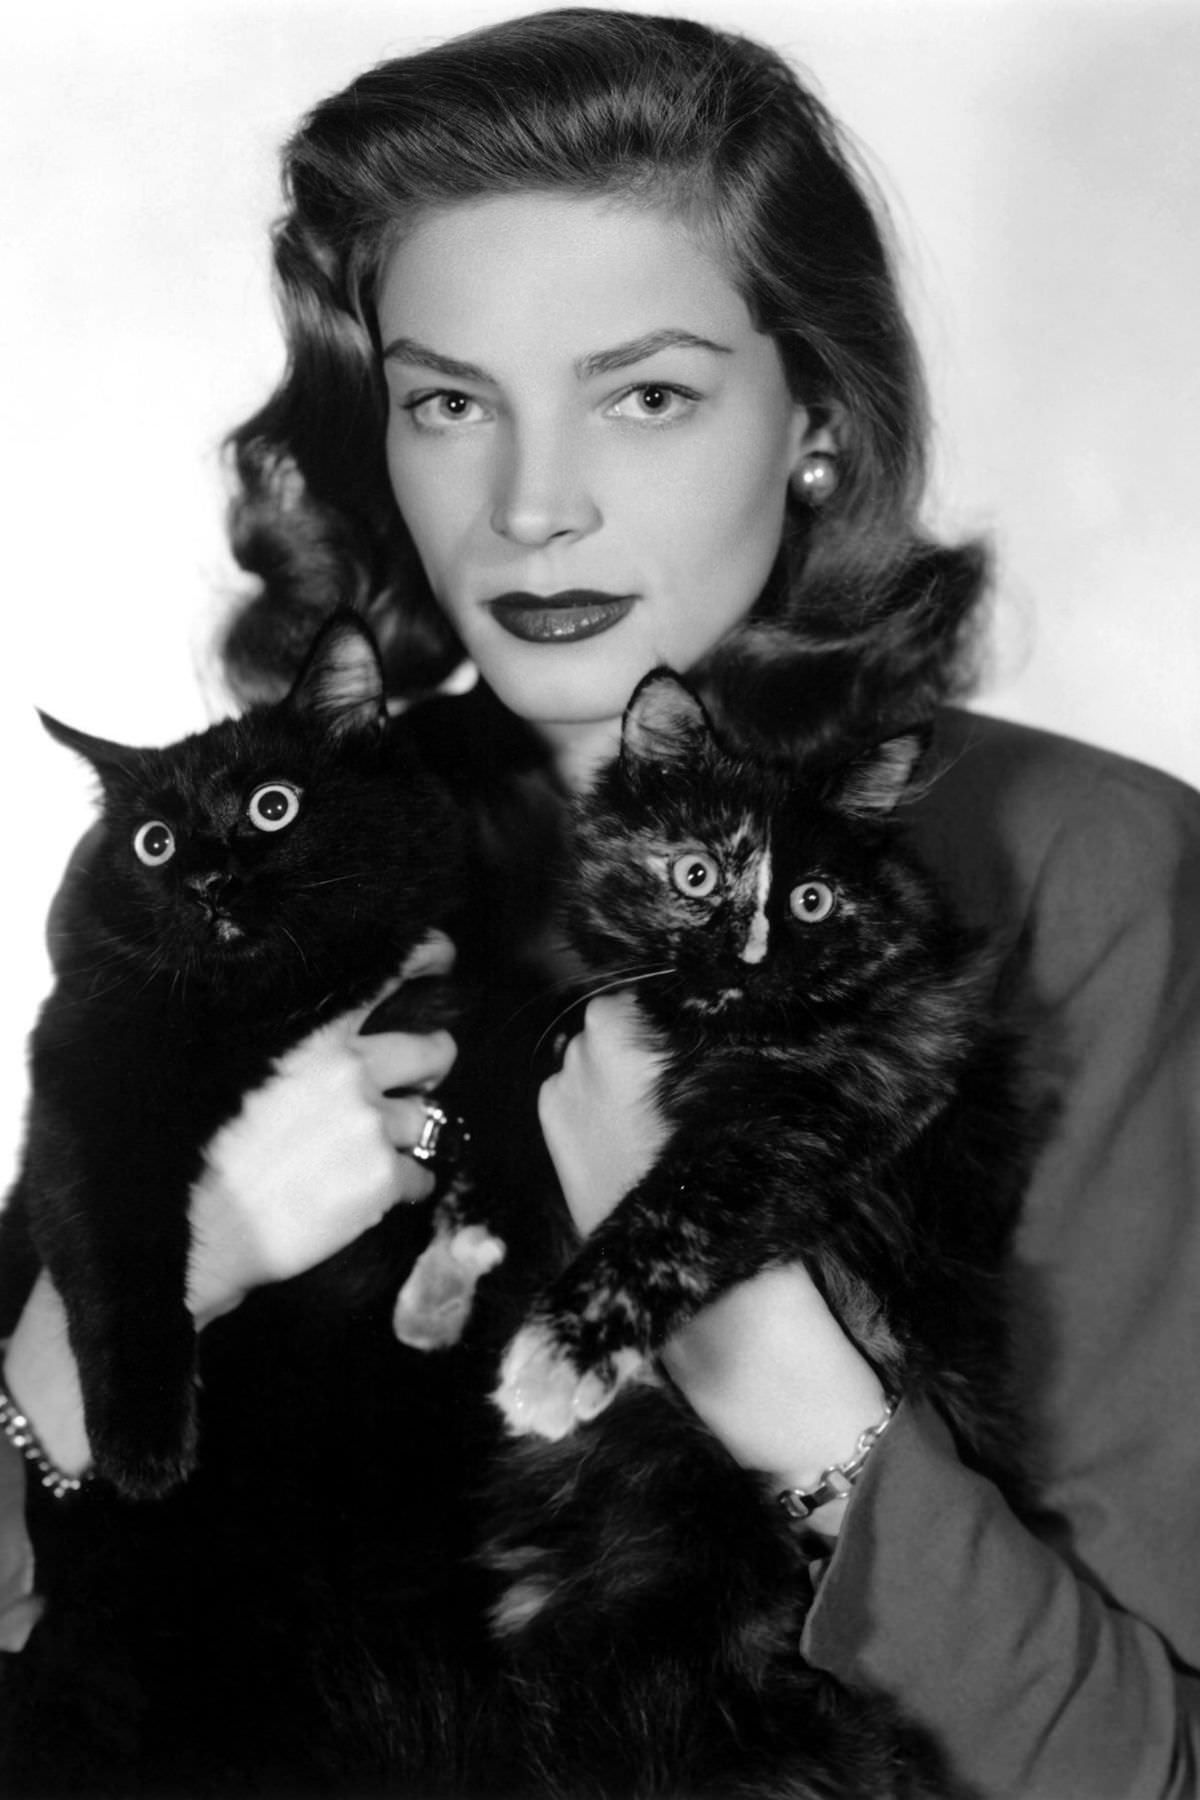 Lauren Bacall poses with two black cats, 1940.